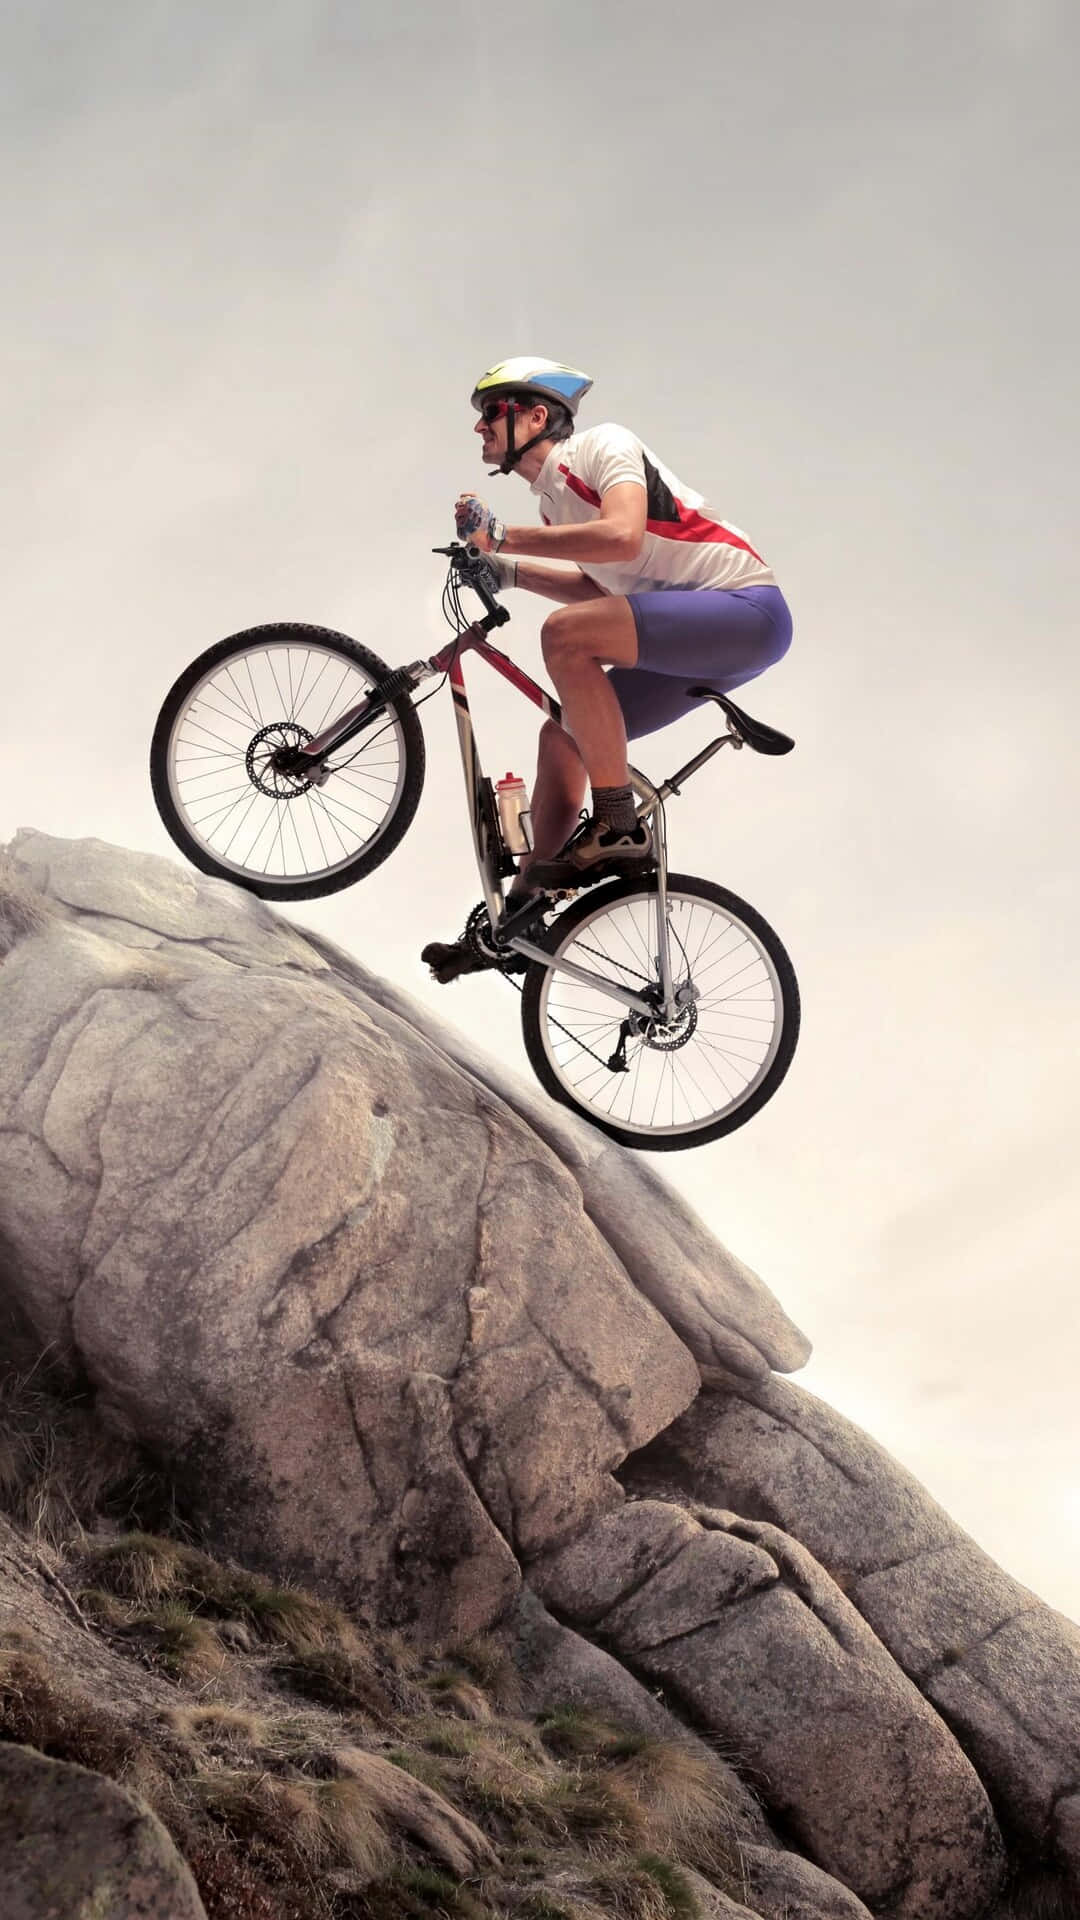 "An extreme BMX athlete performs a mid-air jump on his trick bicyle." Wallpaper